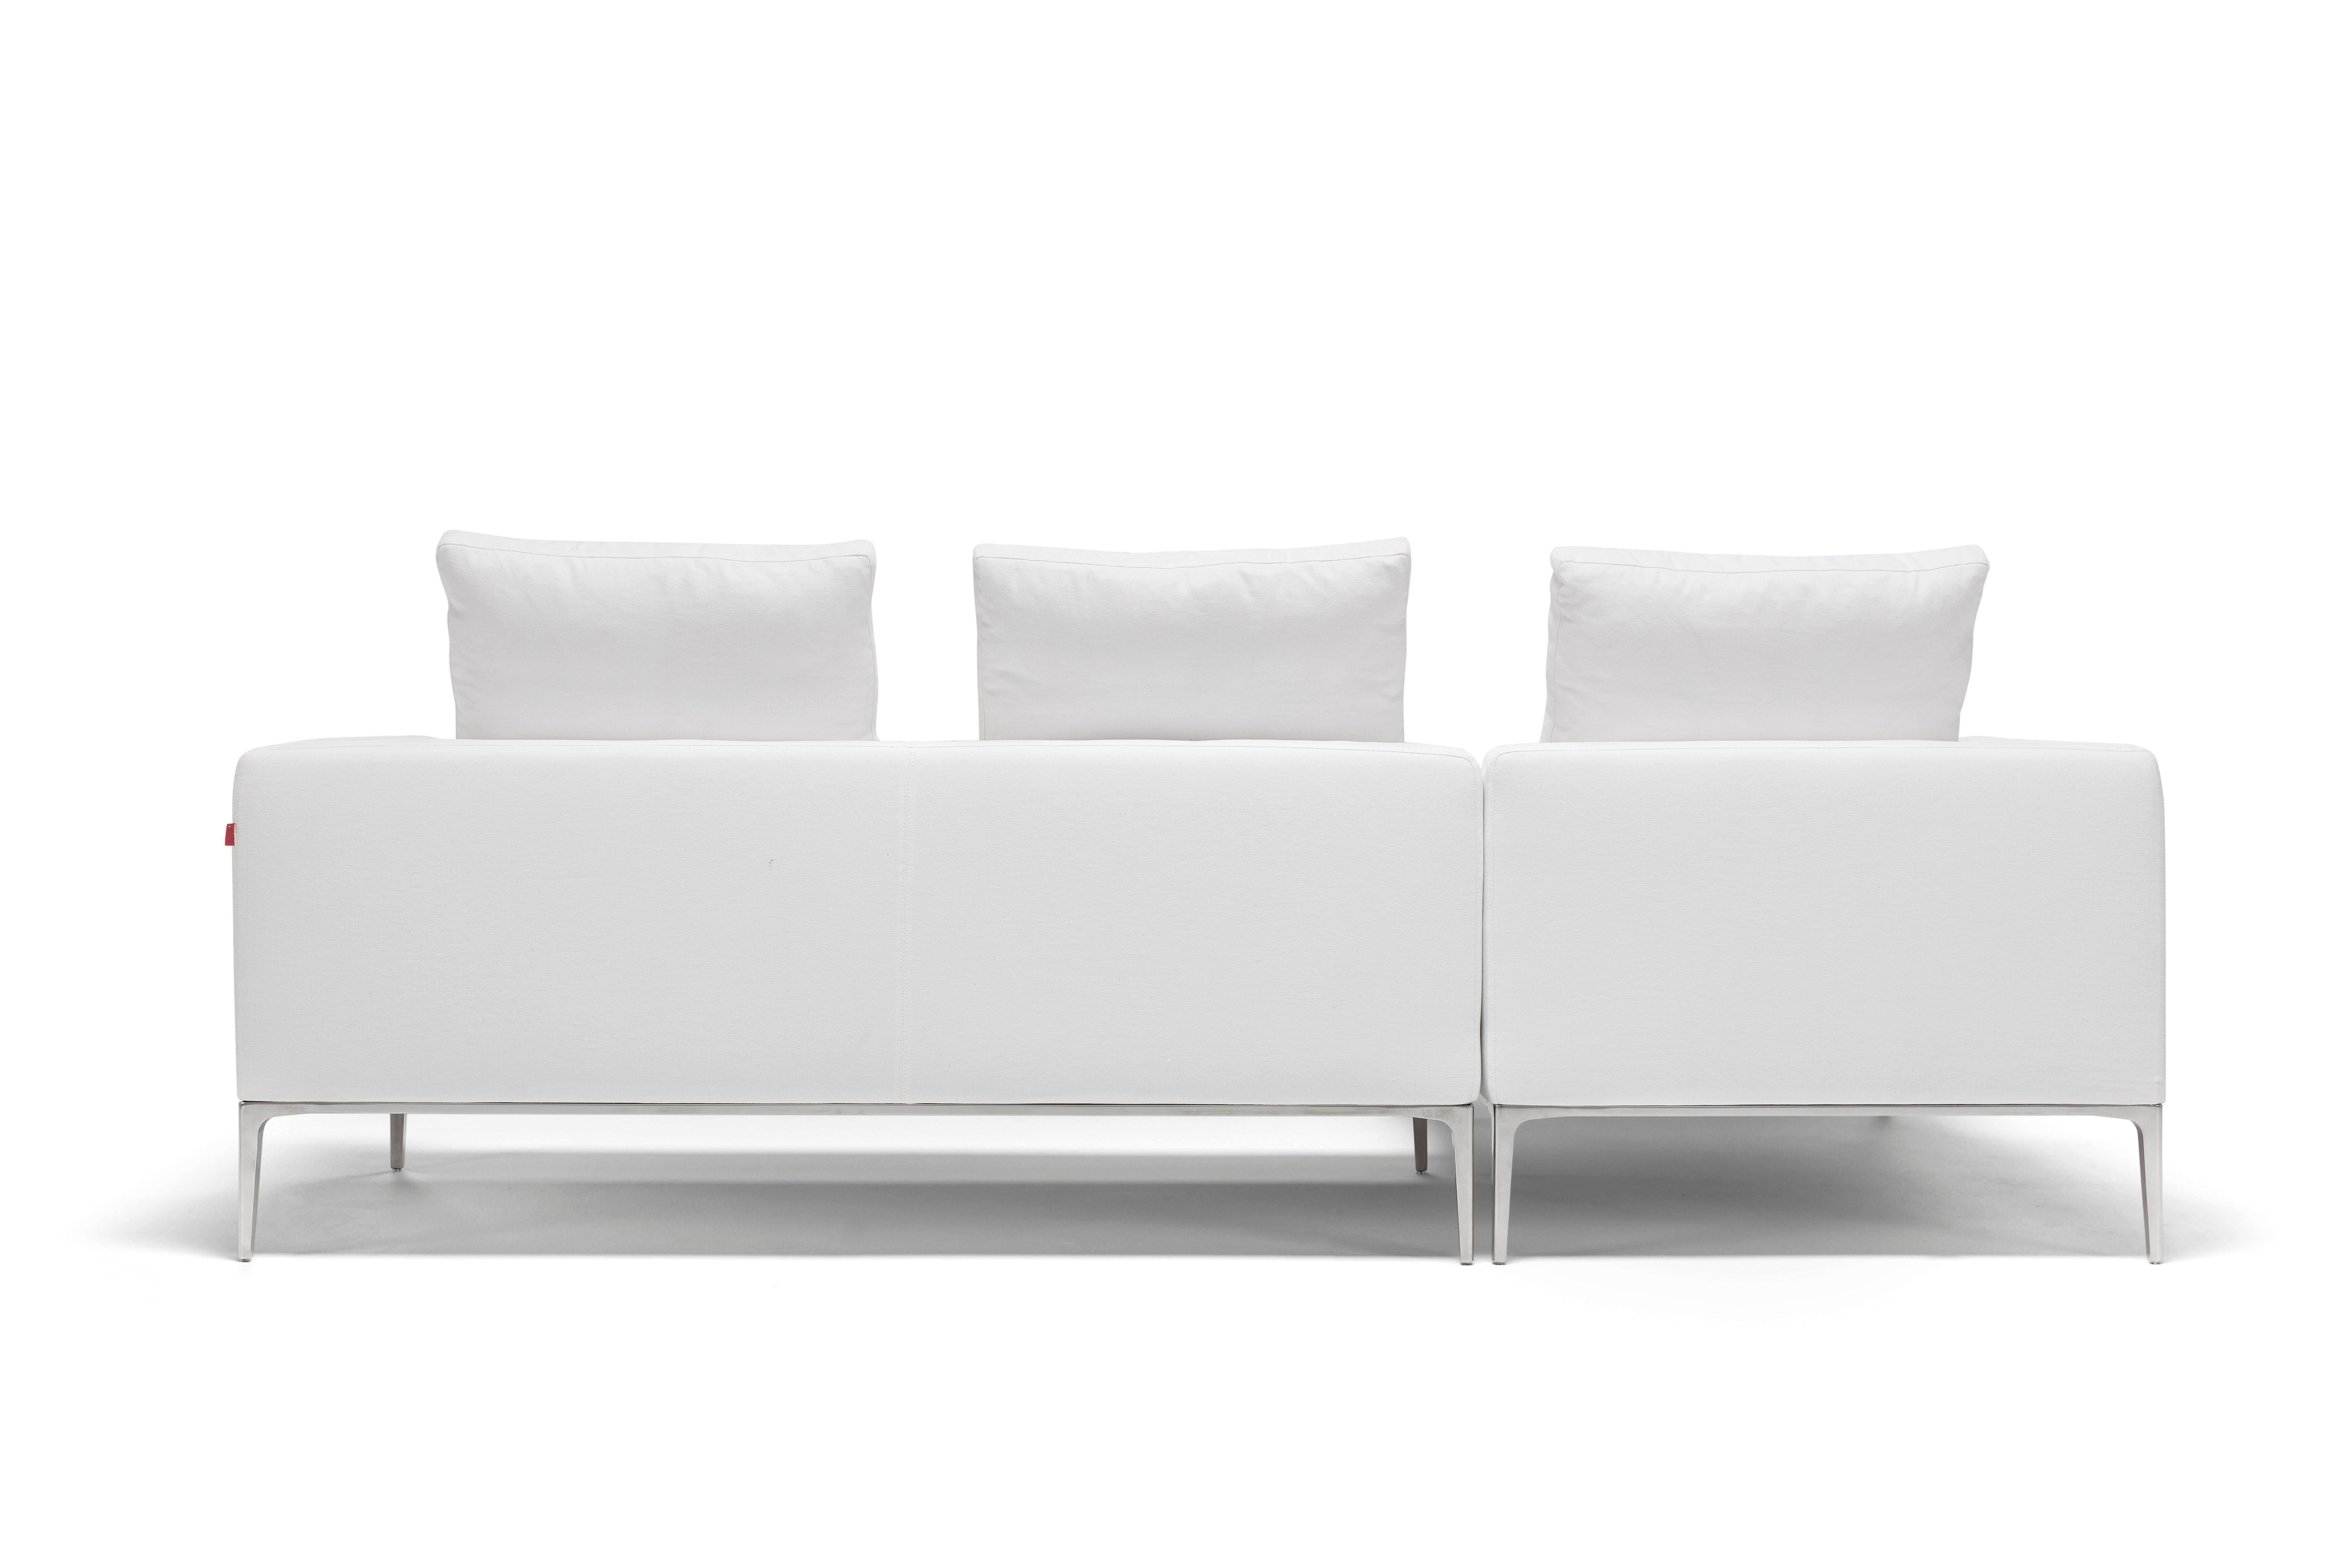 Hand-Crafted Amura 'Leonard' Chaise Lounge Sofa in White Fabric by Emanuel Gargano For Sale